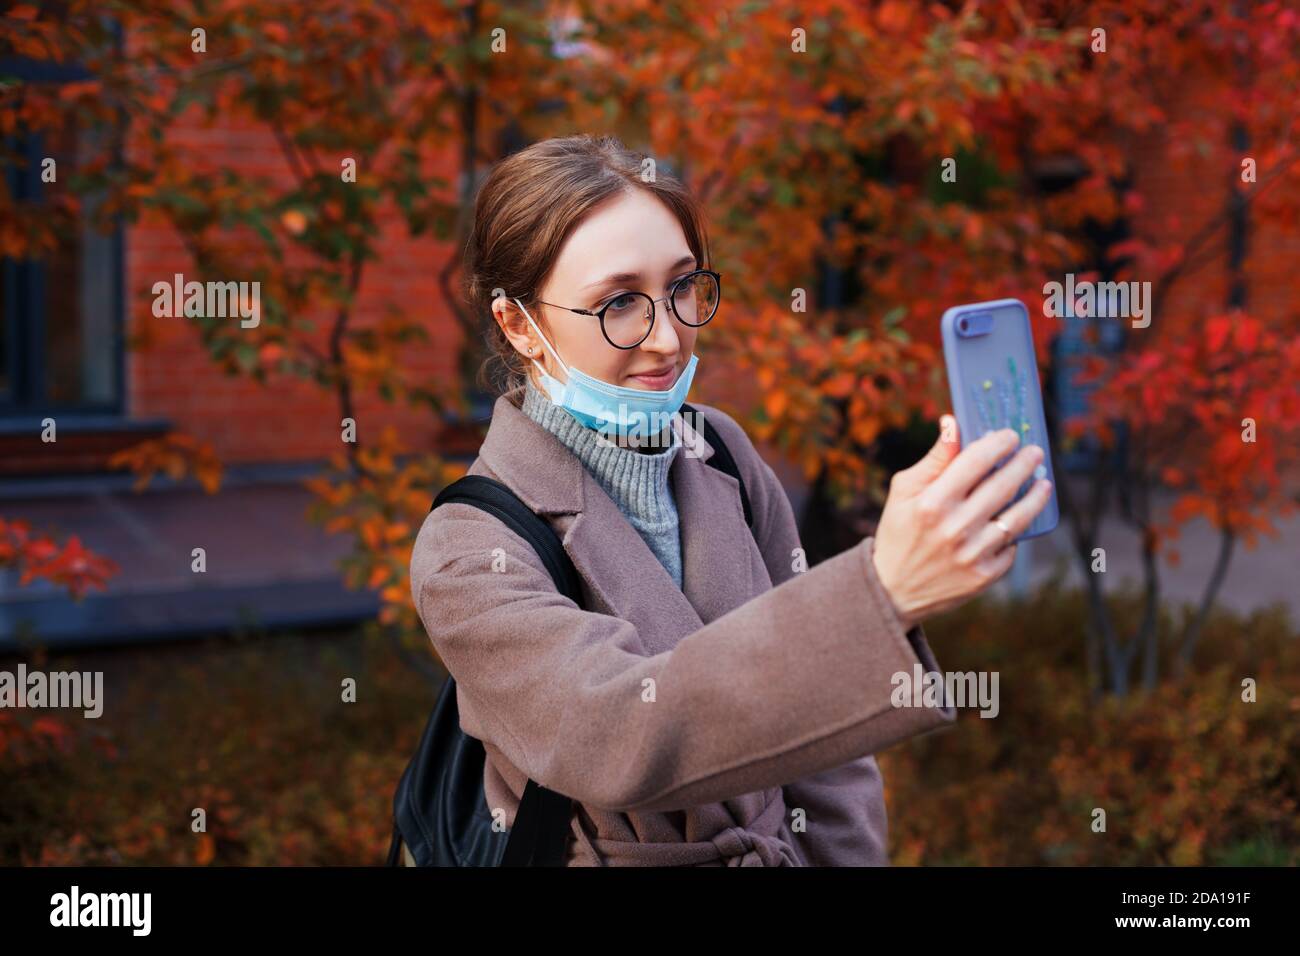 Woman holding smartphone in front of her during video call. Communication with relatives during coronavirus pandemic. Stock Photo